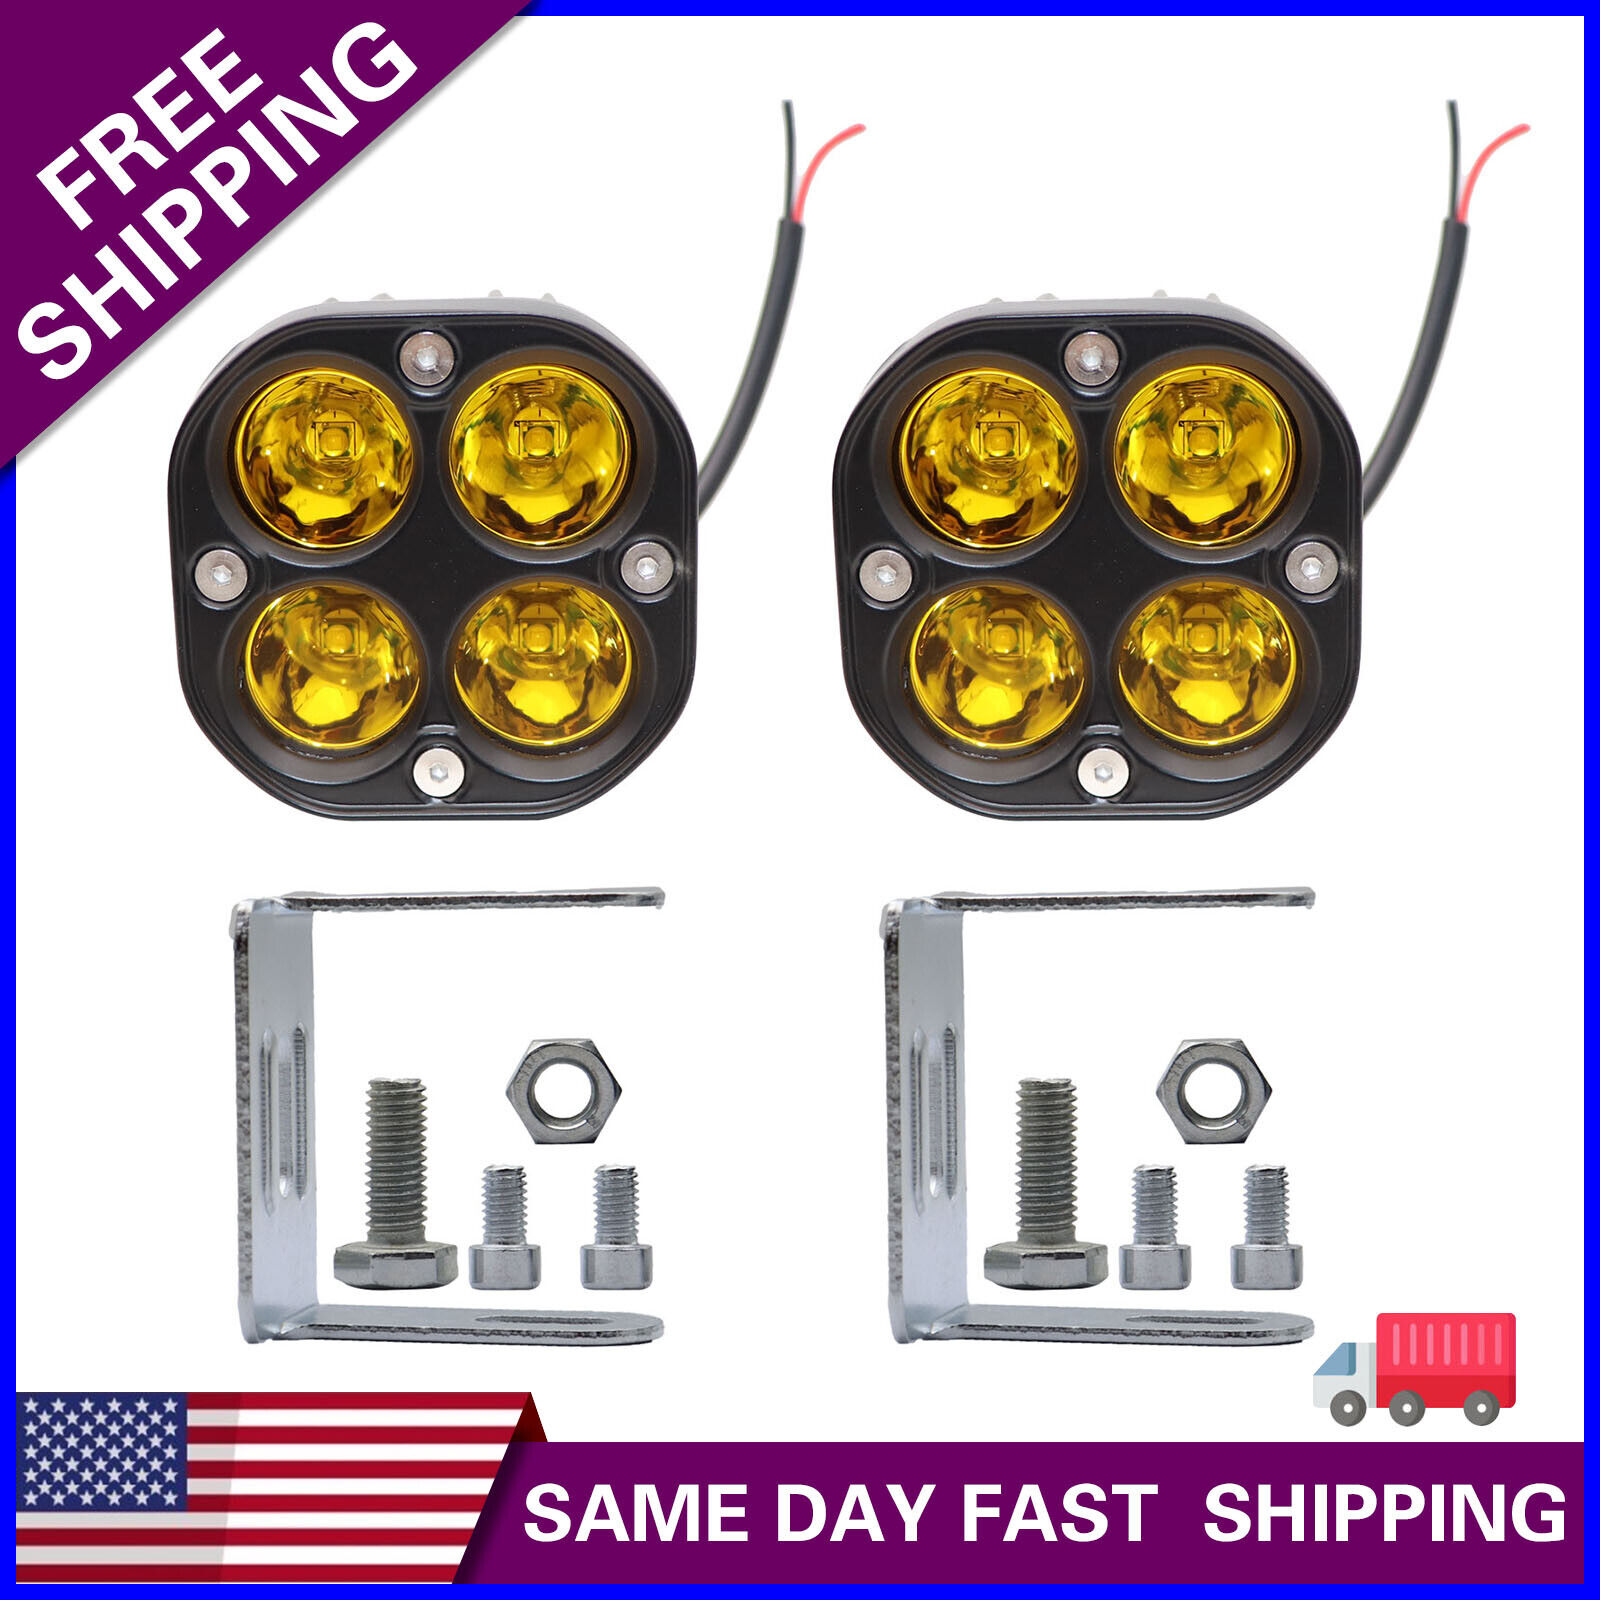 2 X 3inch 80W LED WORK LIGHT Spot Cube Pods Driving Amber Fog Offroad Truck Boat